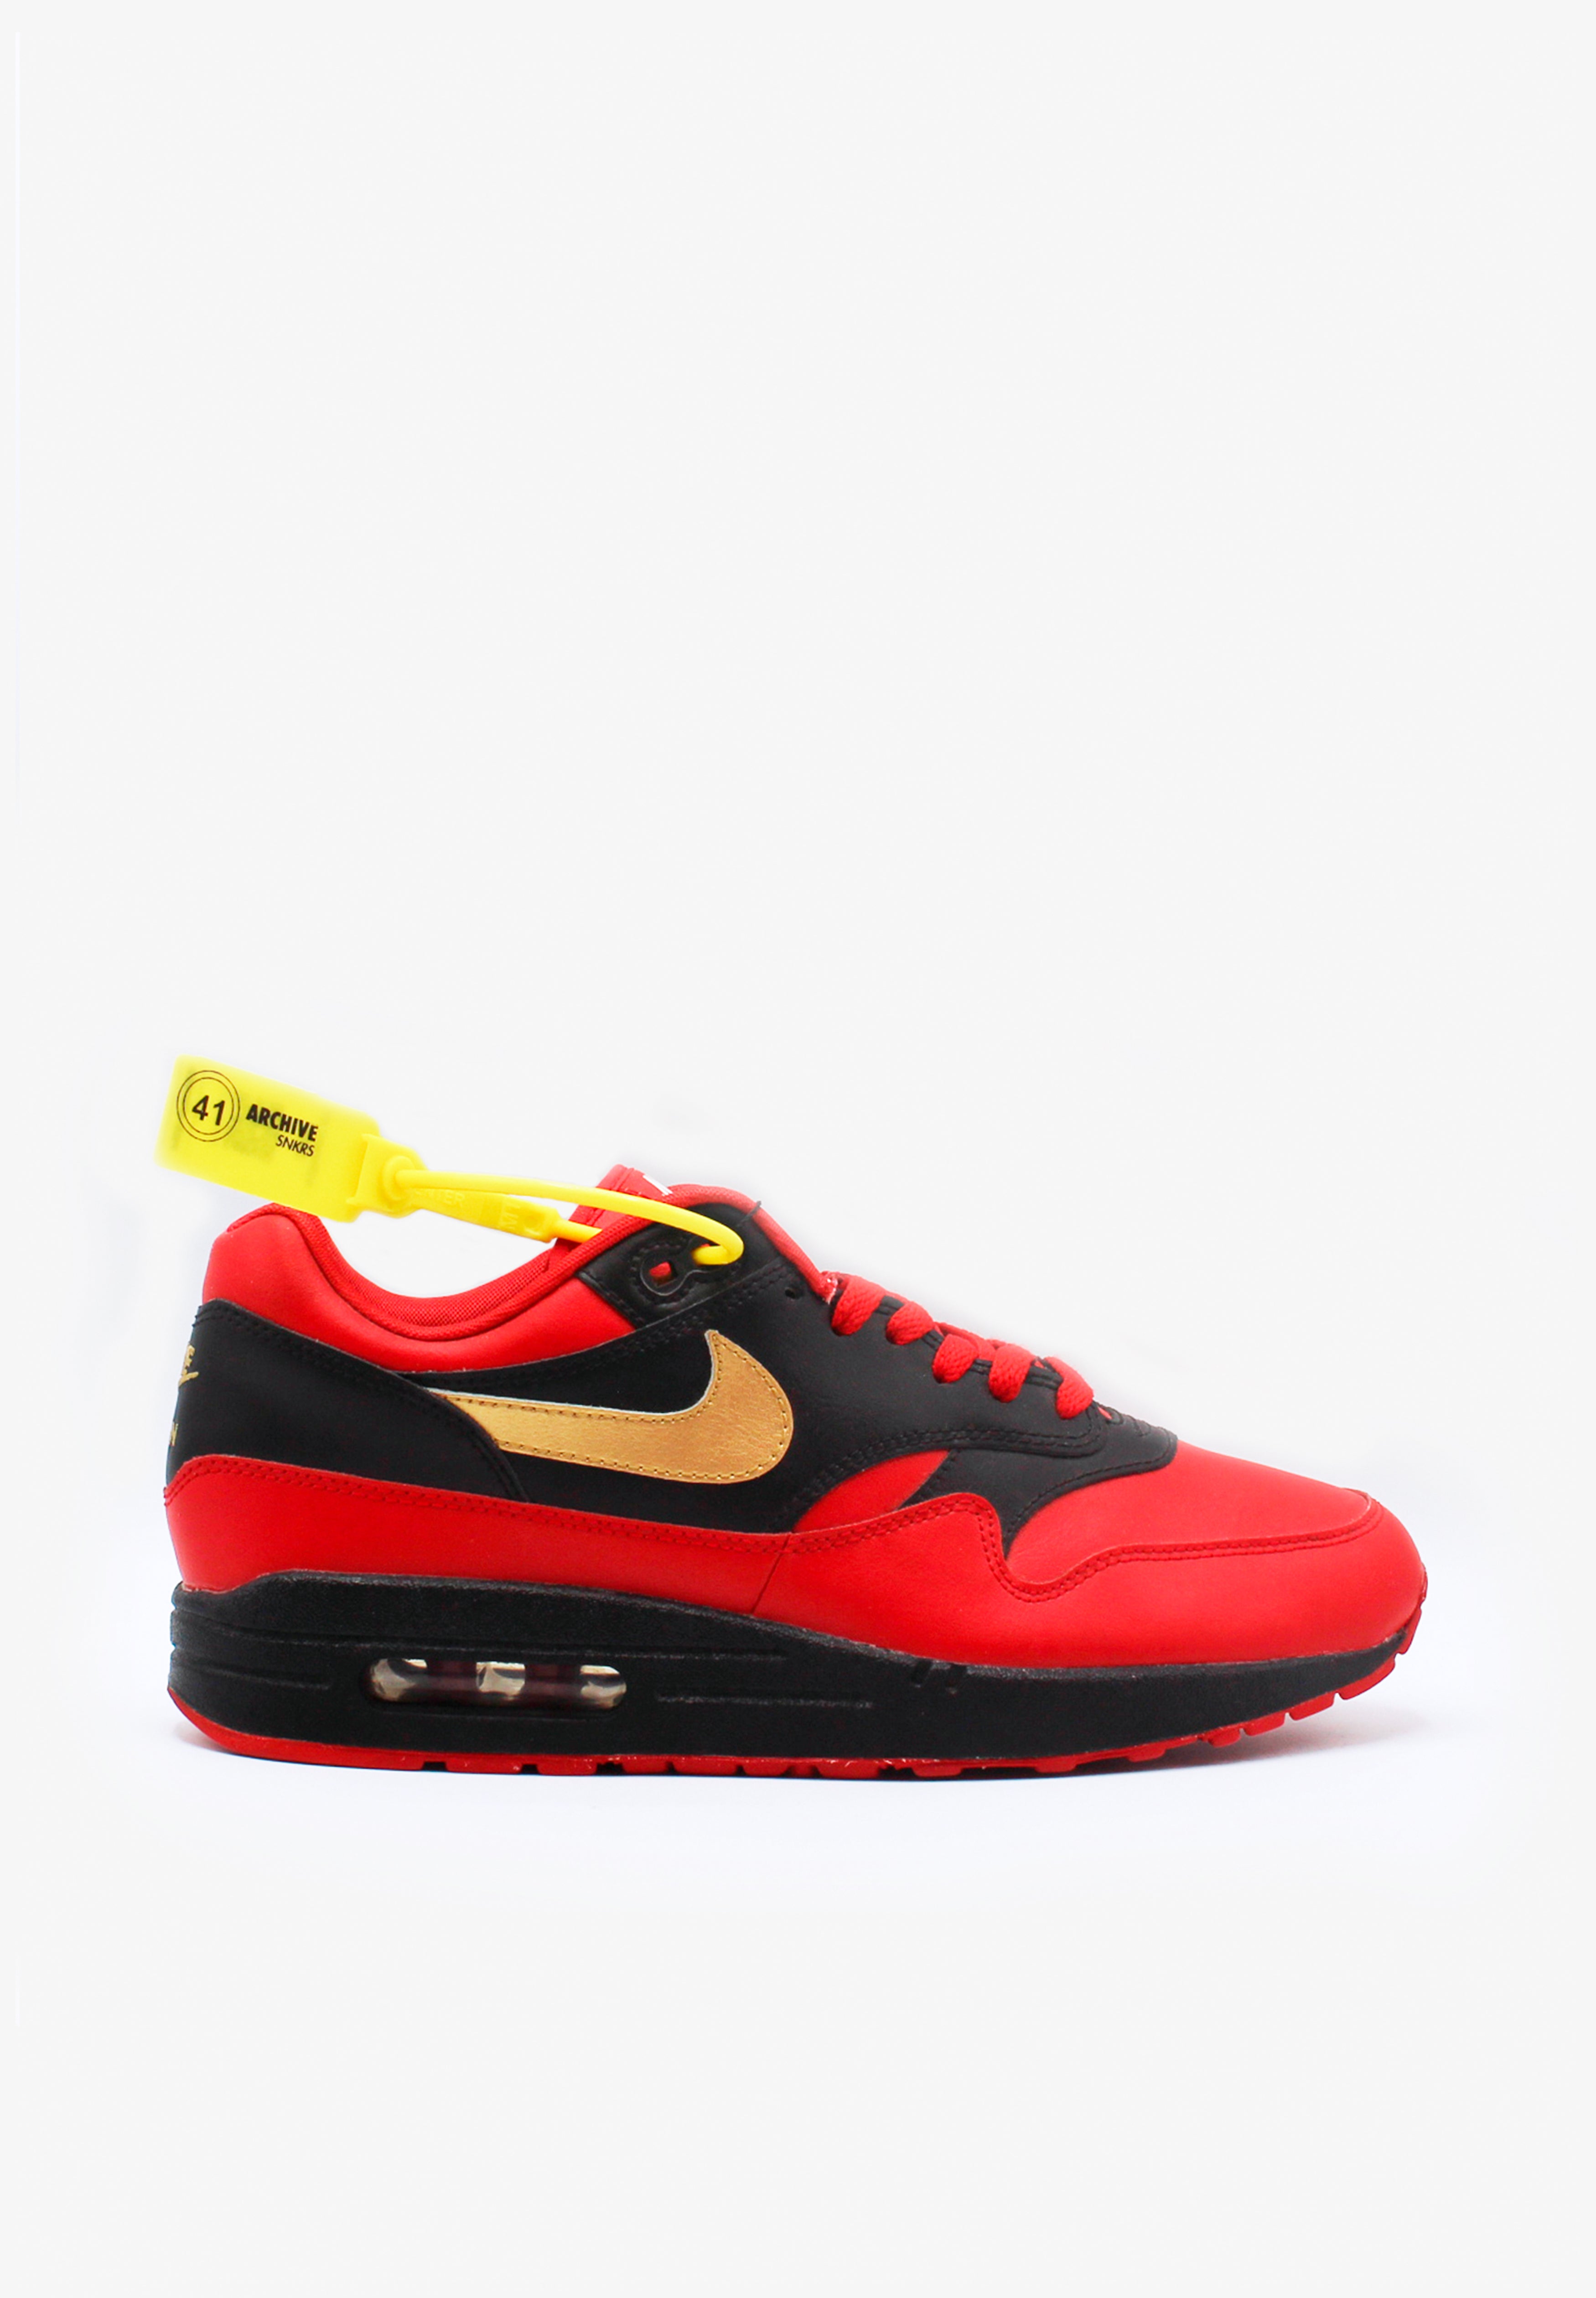 ARCHIVE SNEAKRS | SNEAKERS NIKE AIR MAX 1 ID TALLA 41